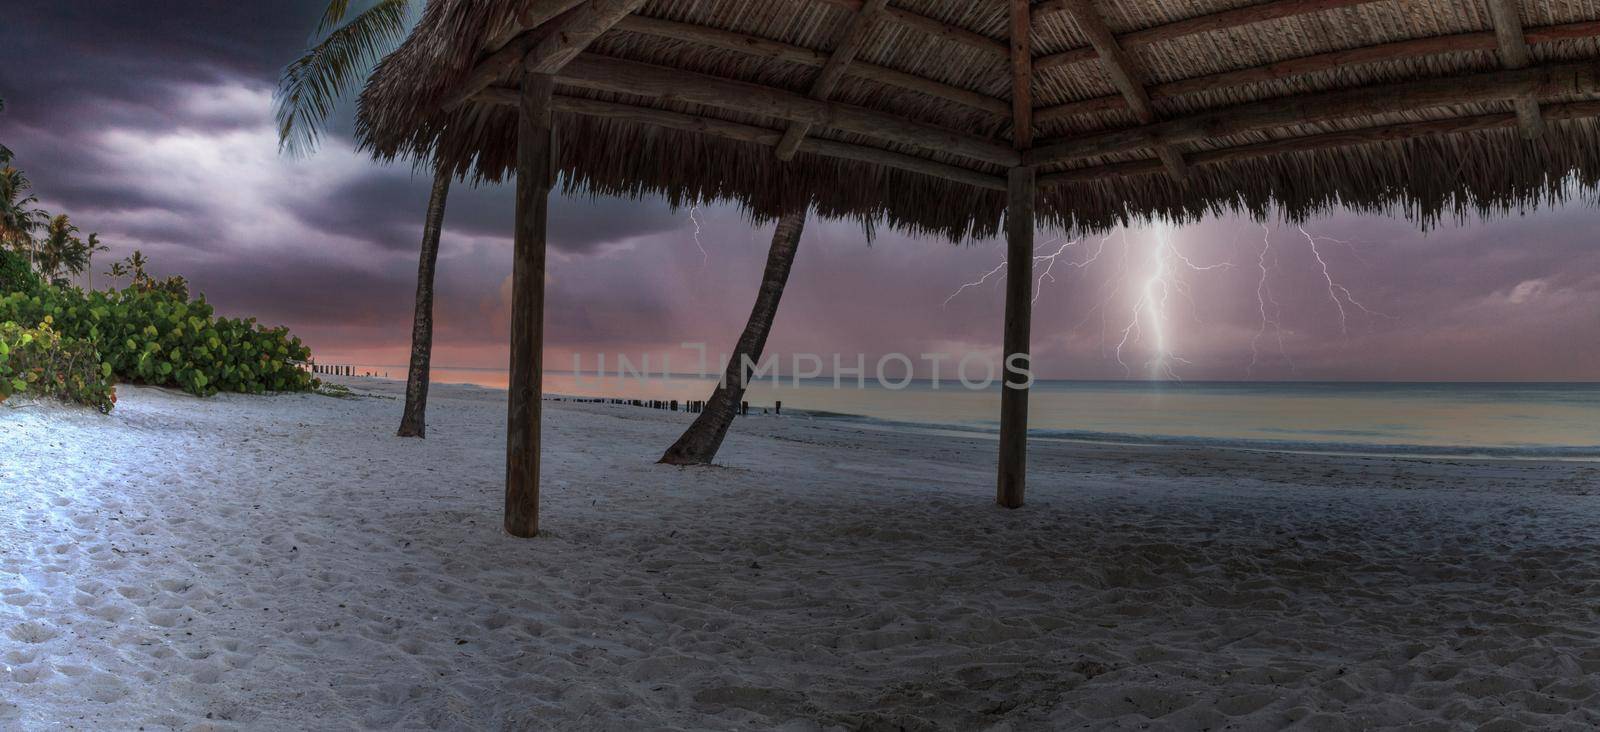 Lightning storm over a tiki at the ocean at Port Royal Beach in Naples, Florida at sunrise.